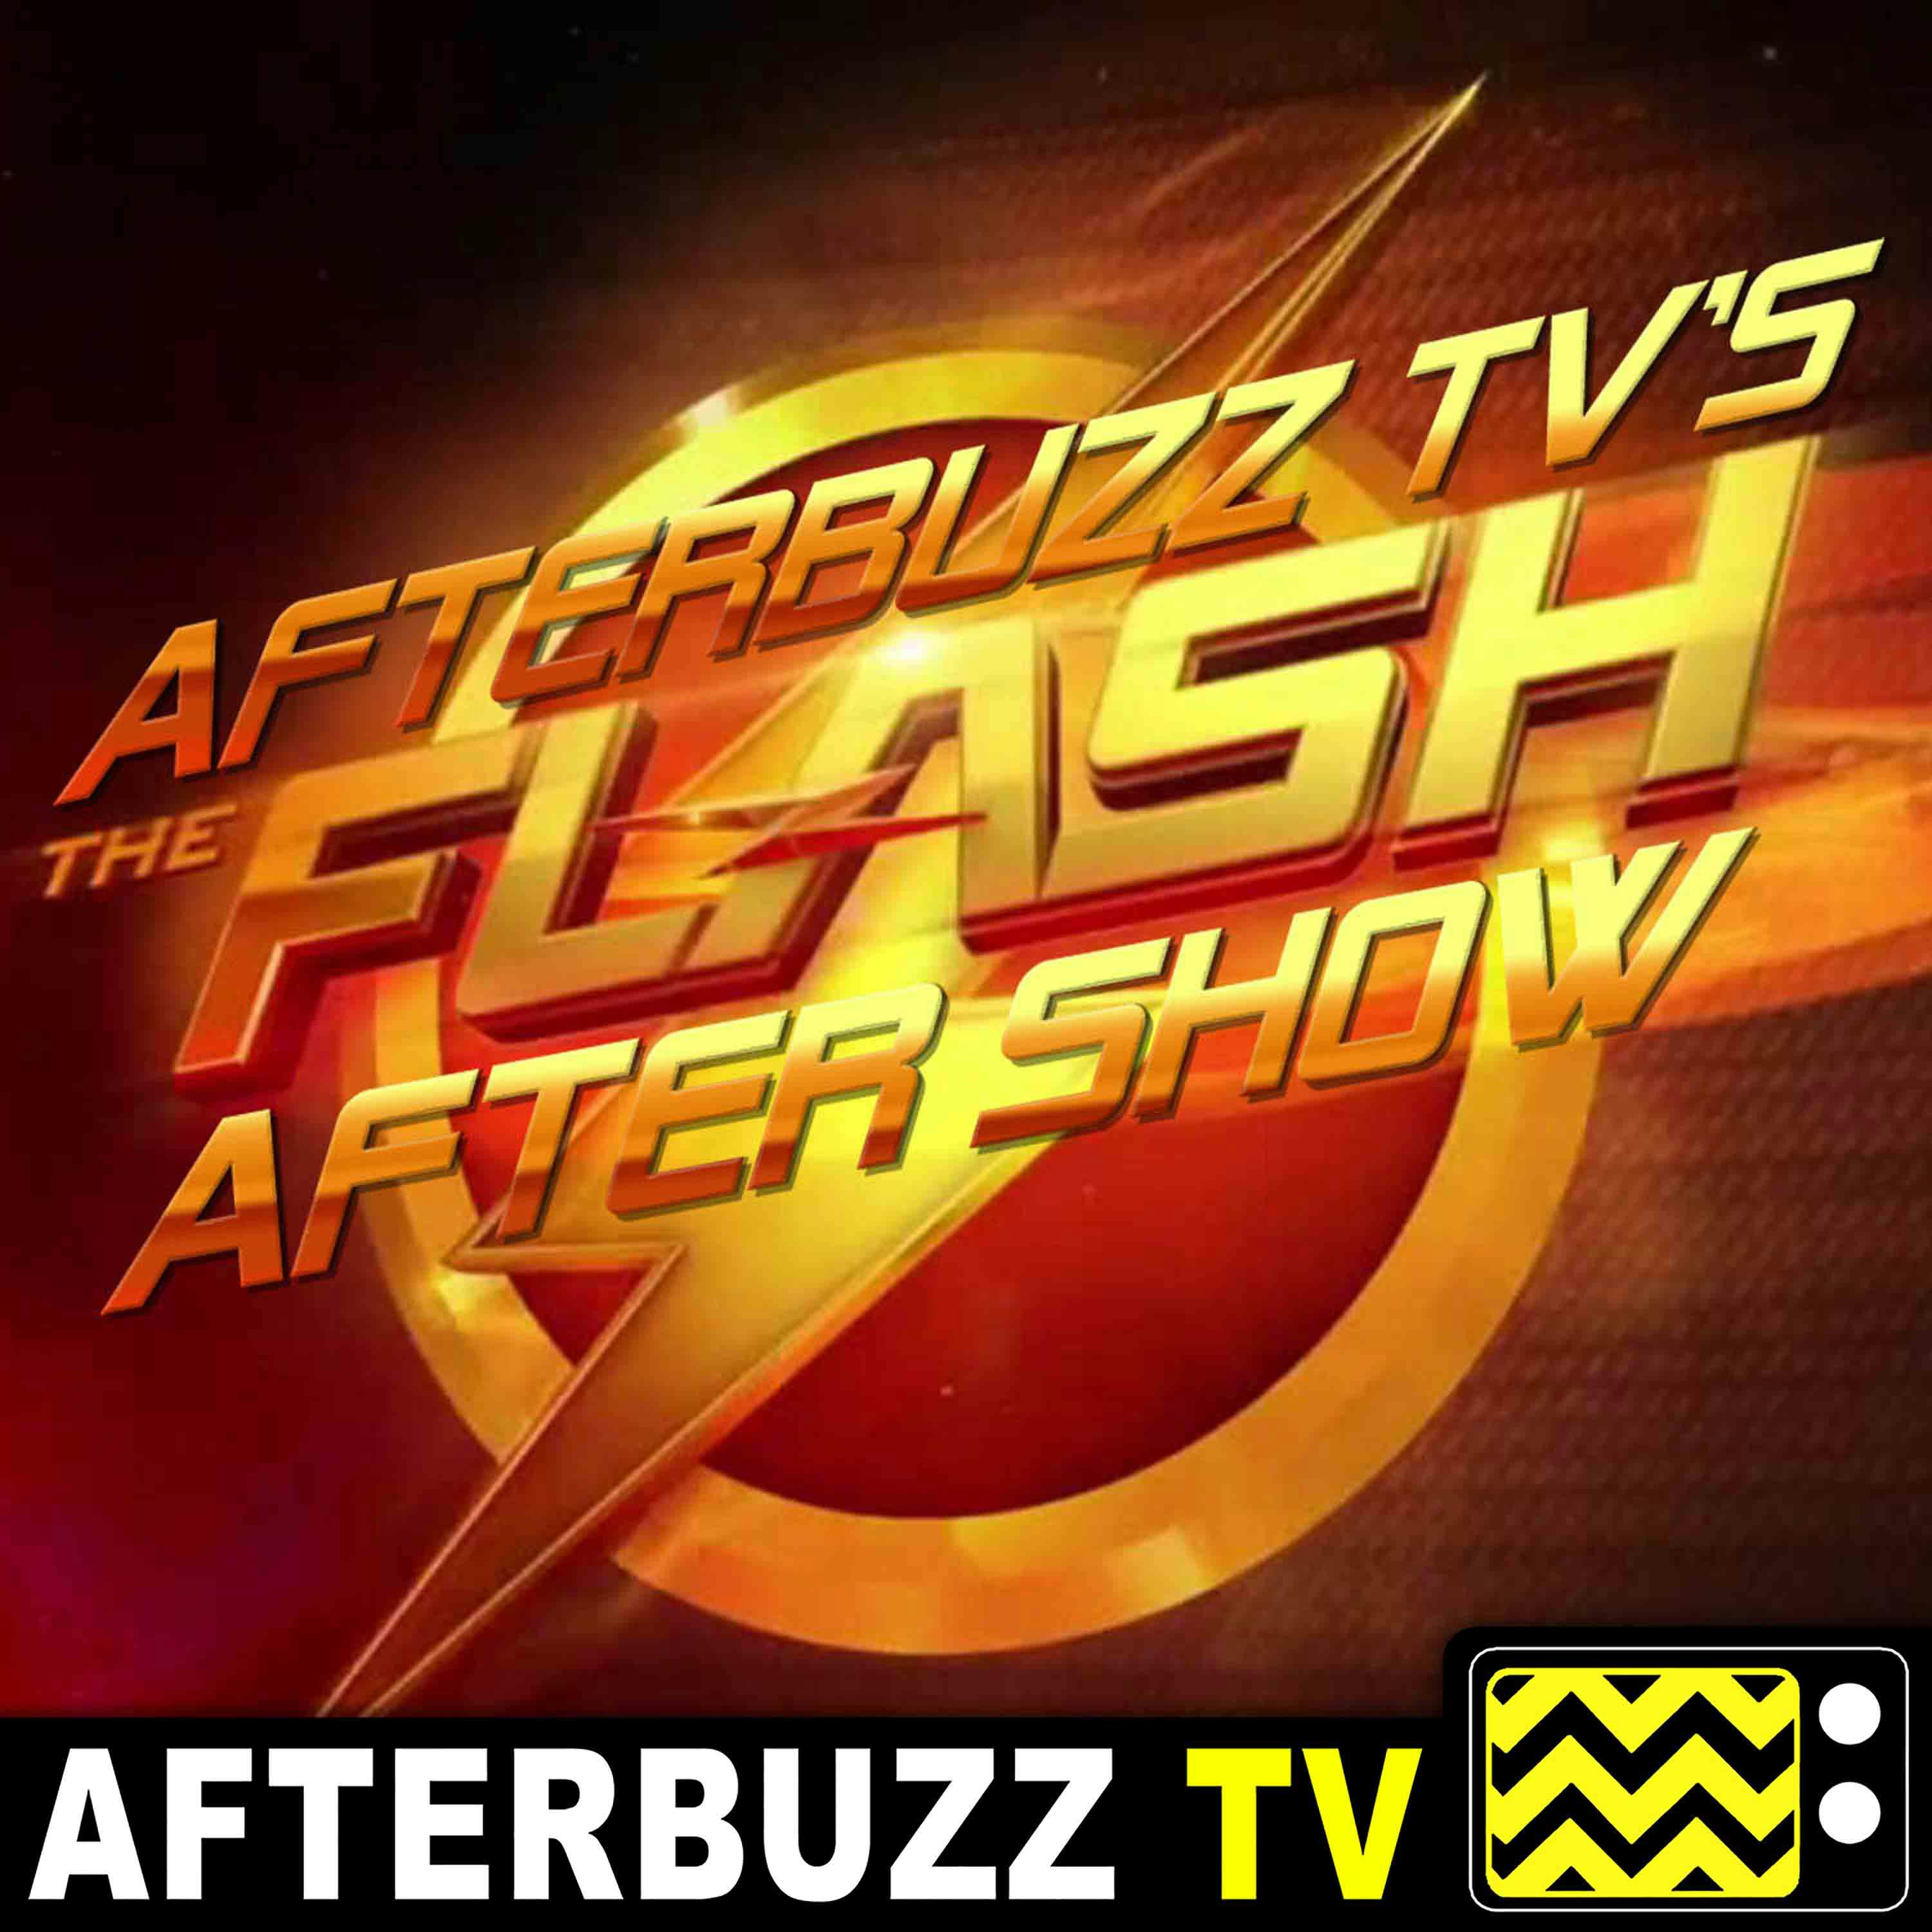 ”Gone RogueThe Girl With the Red Lightning” Season 5 Episodes 20 & 21 ’The Flash’ Review